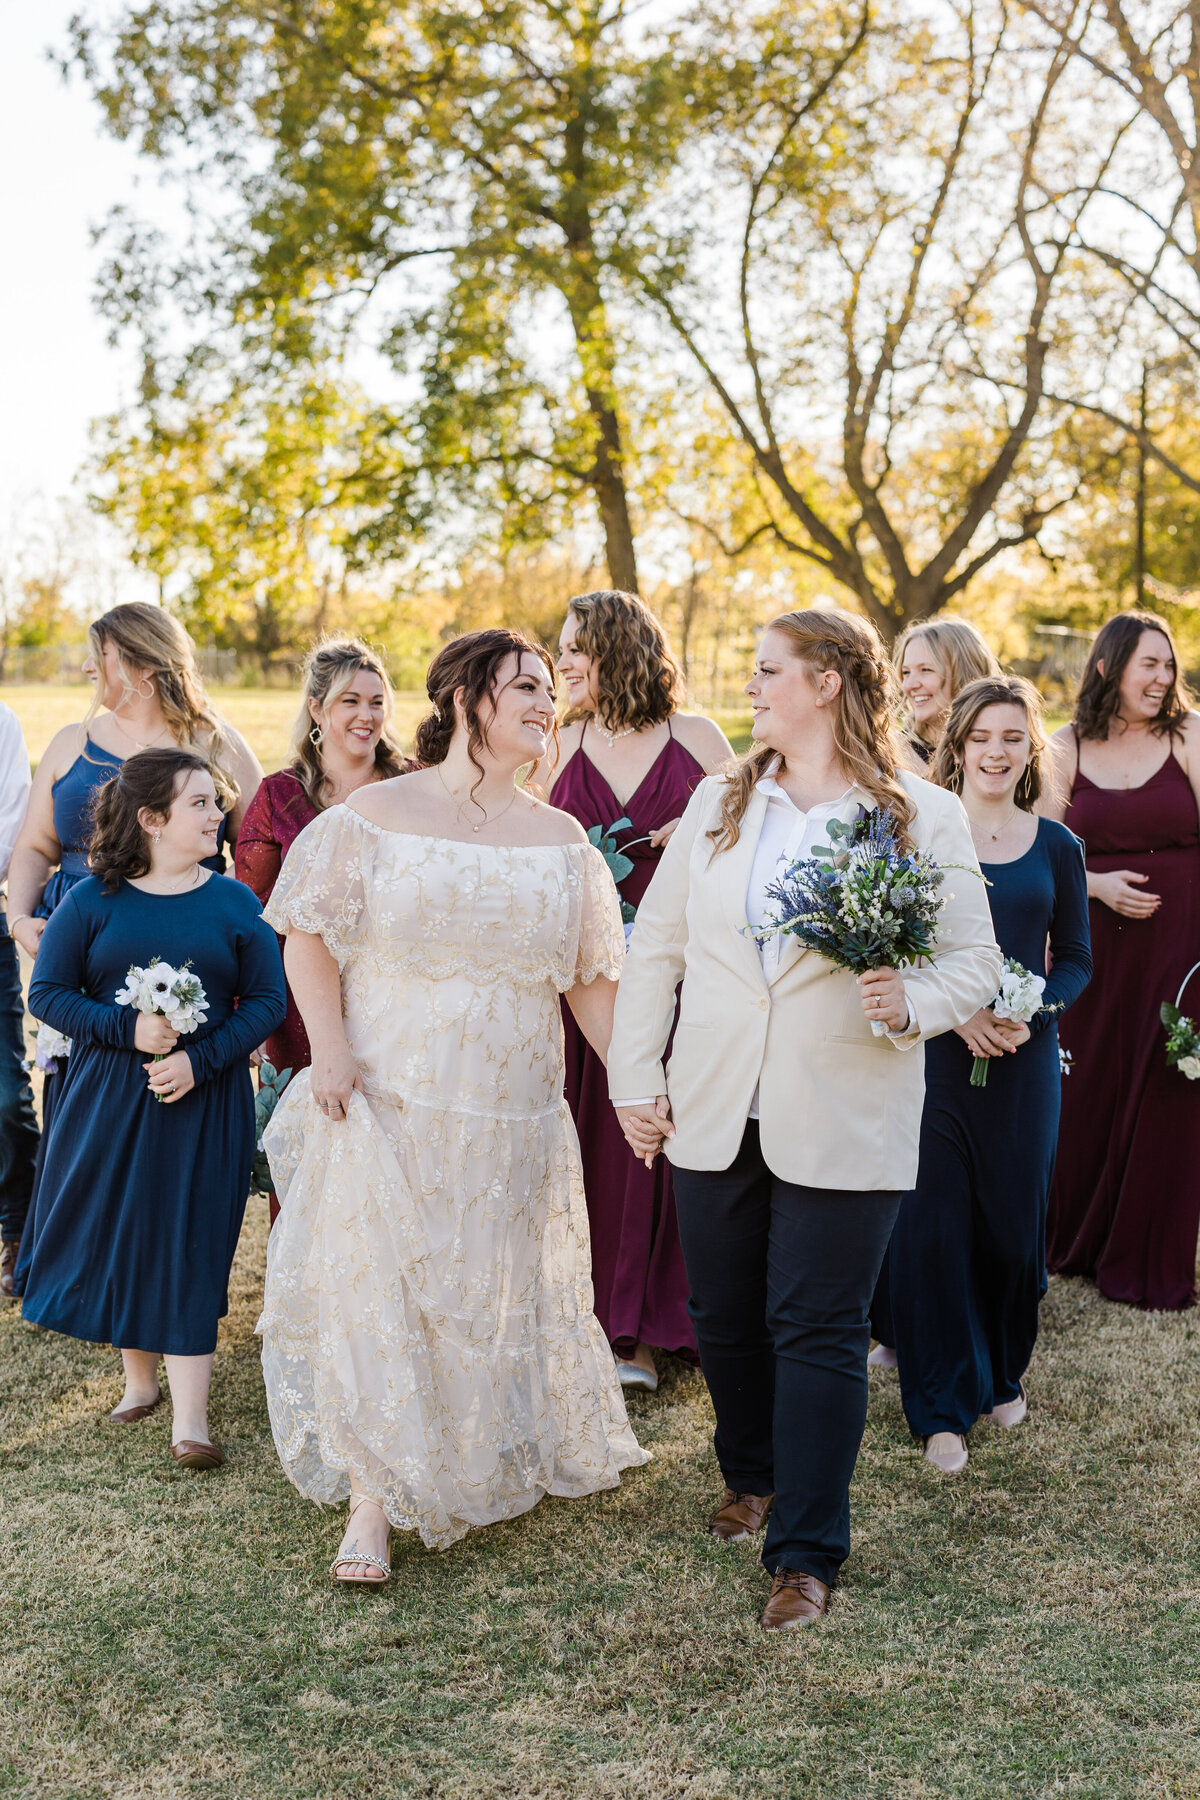 Two brides walking through nature with their wedding party after their wedding ceremony in Dallas, Texas. The bride on the right is wearing a cream jacket, dark dress pants, and is holding a bouquet. The bride on the left is wearing an intricate, flowing, white dress. The wedding party is wearing dresses of either blue or burgundy and many of them are carrying small bouquets.